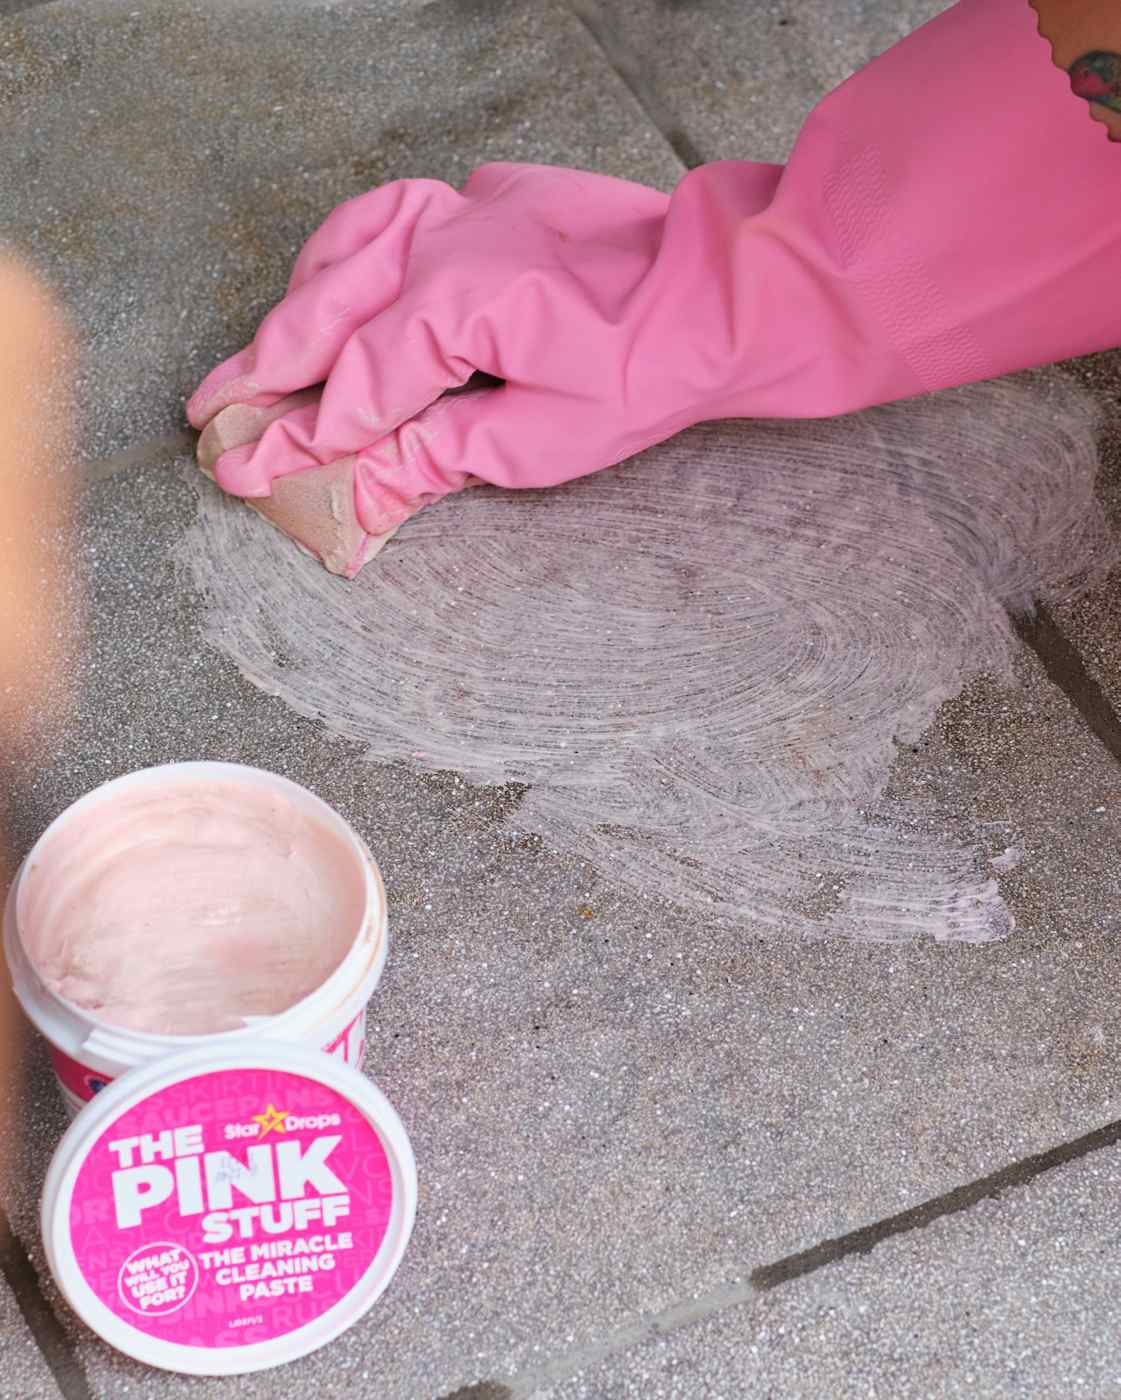 The Pink Stuff The Miracle Cleaning Paste; image 3 of 5